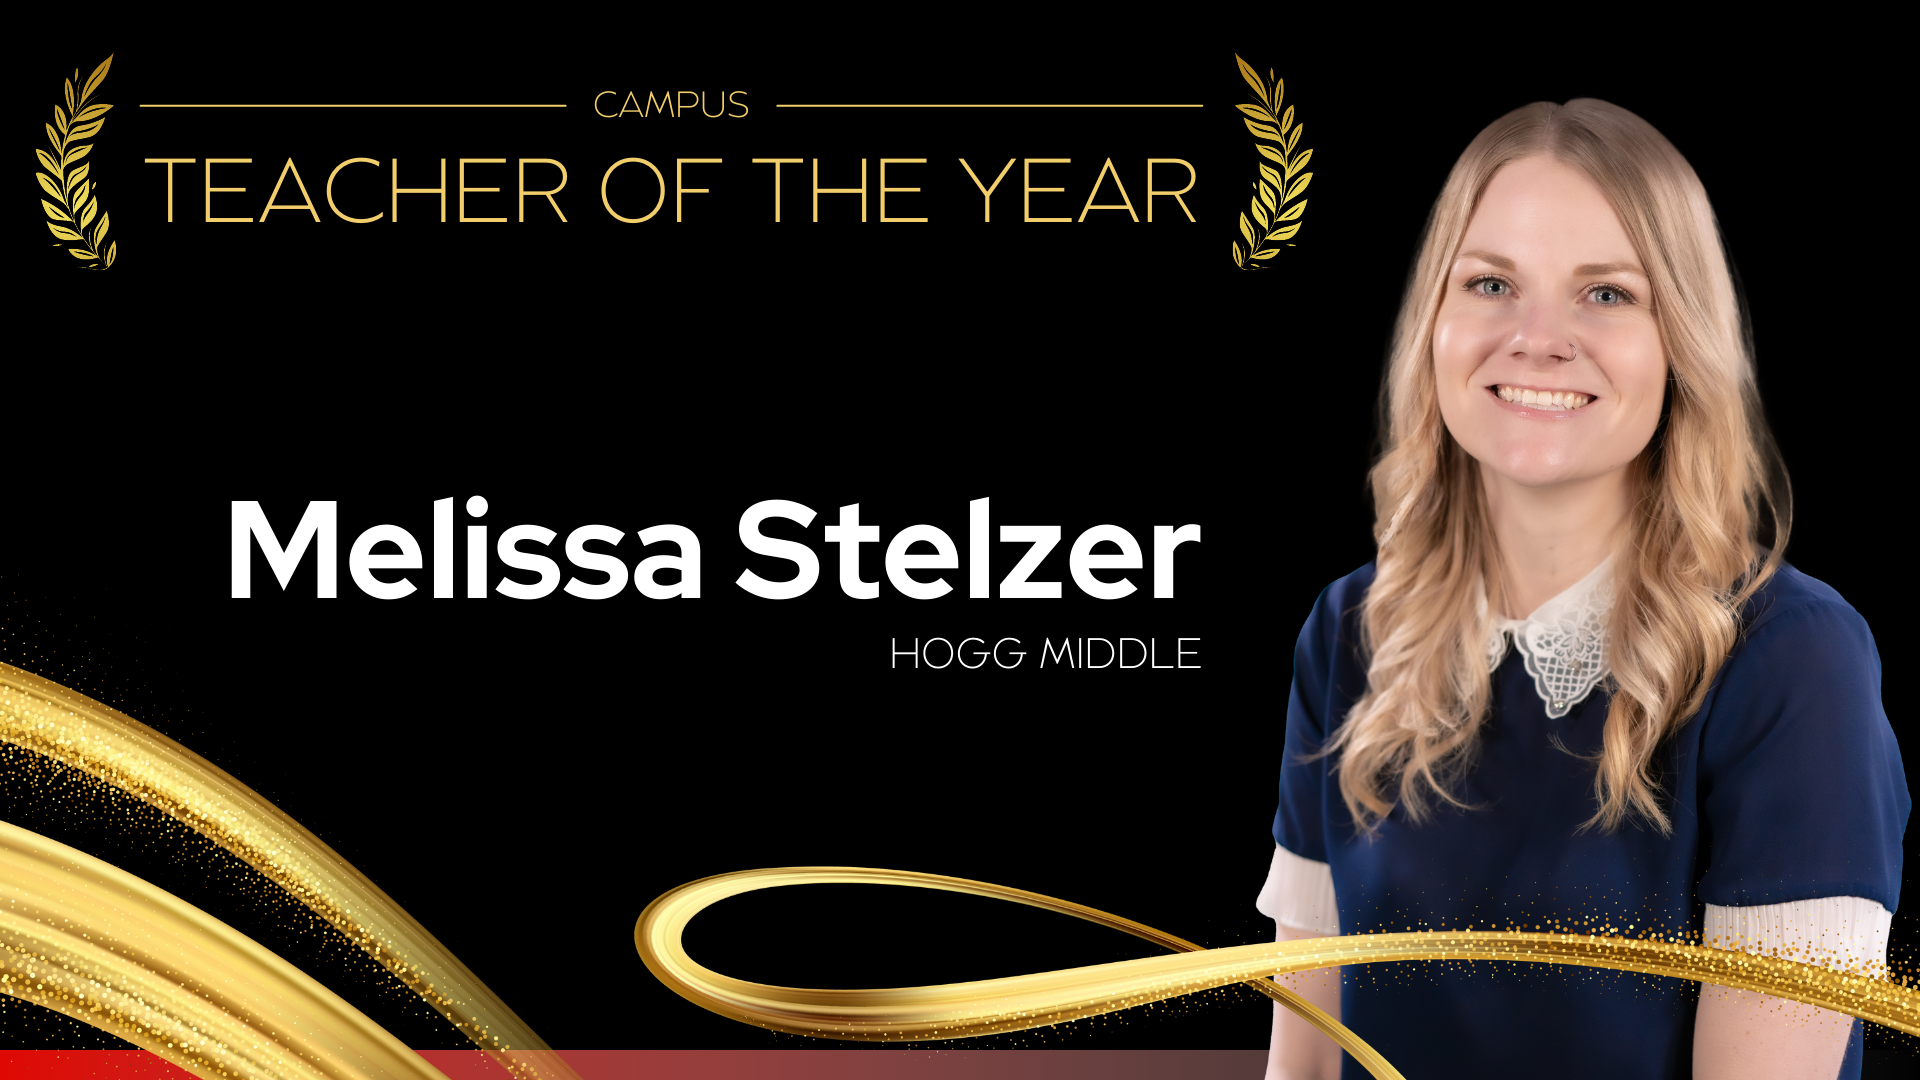 Campus Teacher of the Year James S. Hogg Middle School - Melissa Stelzer 